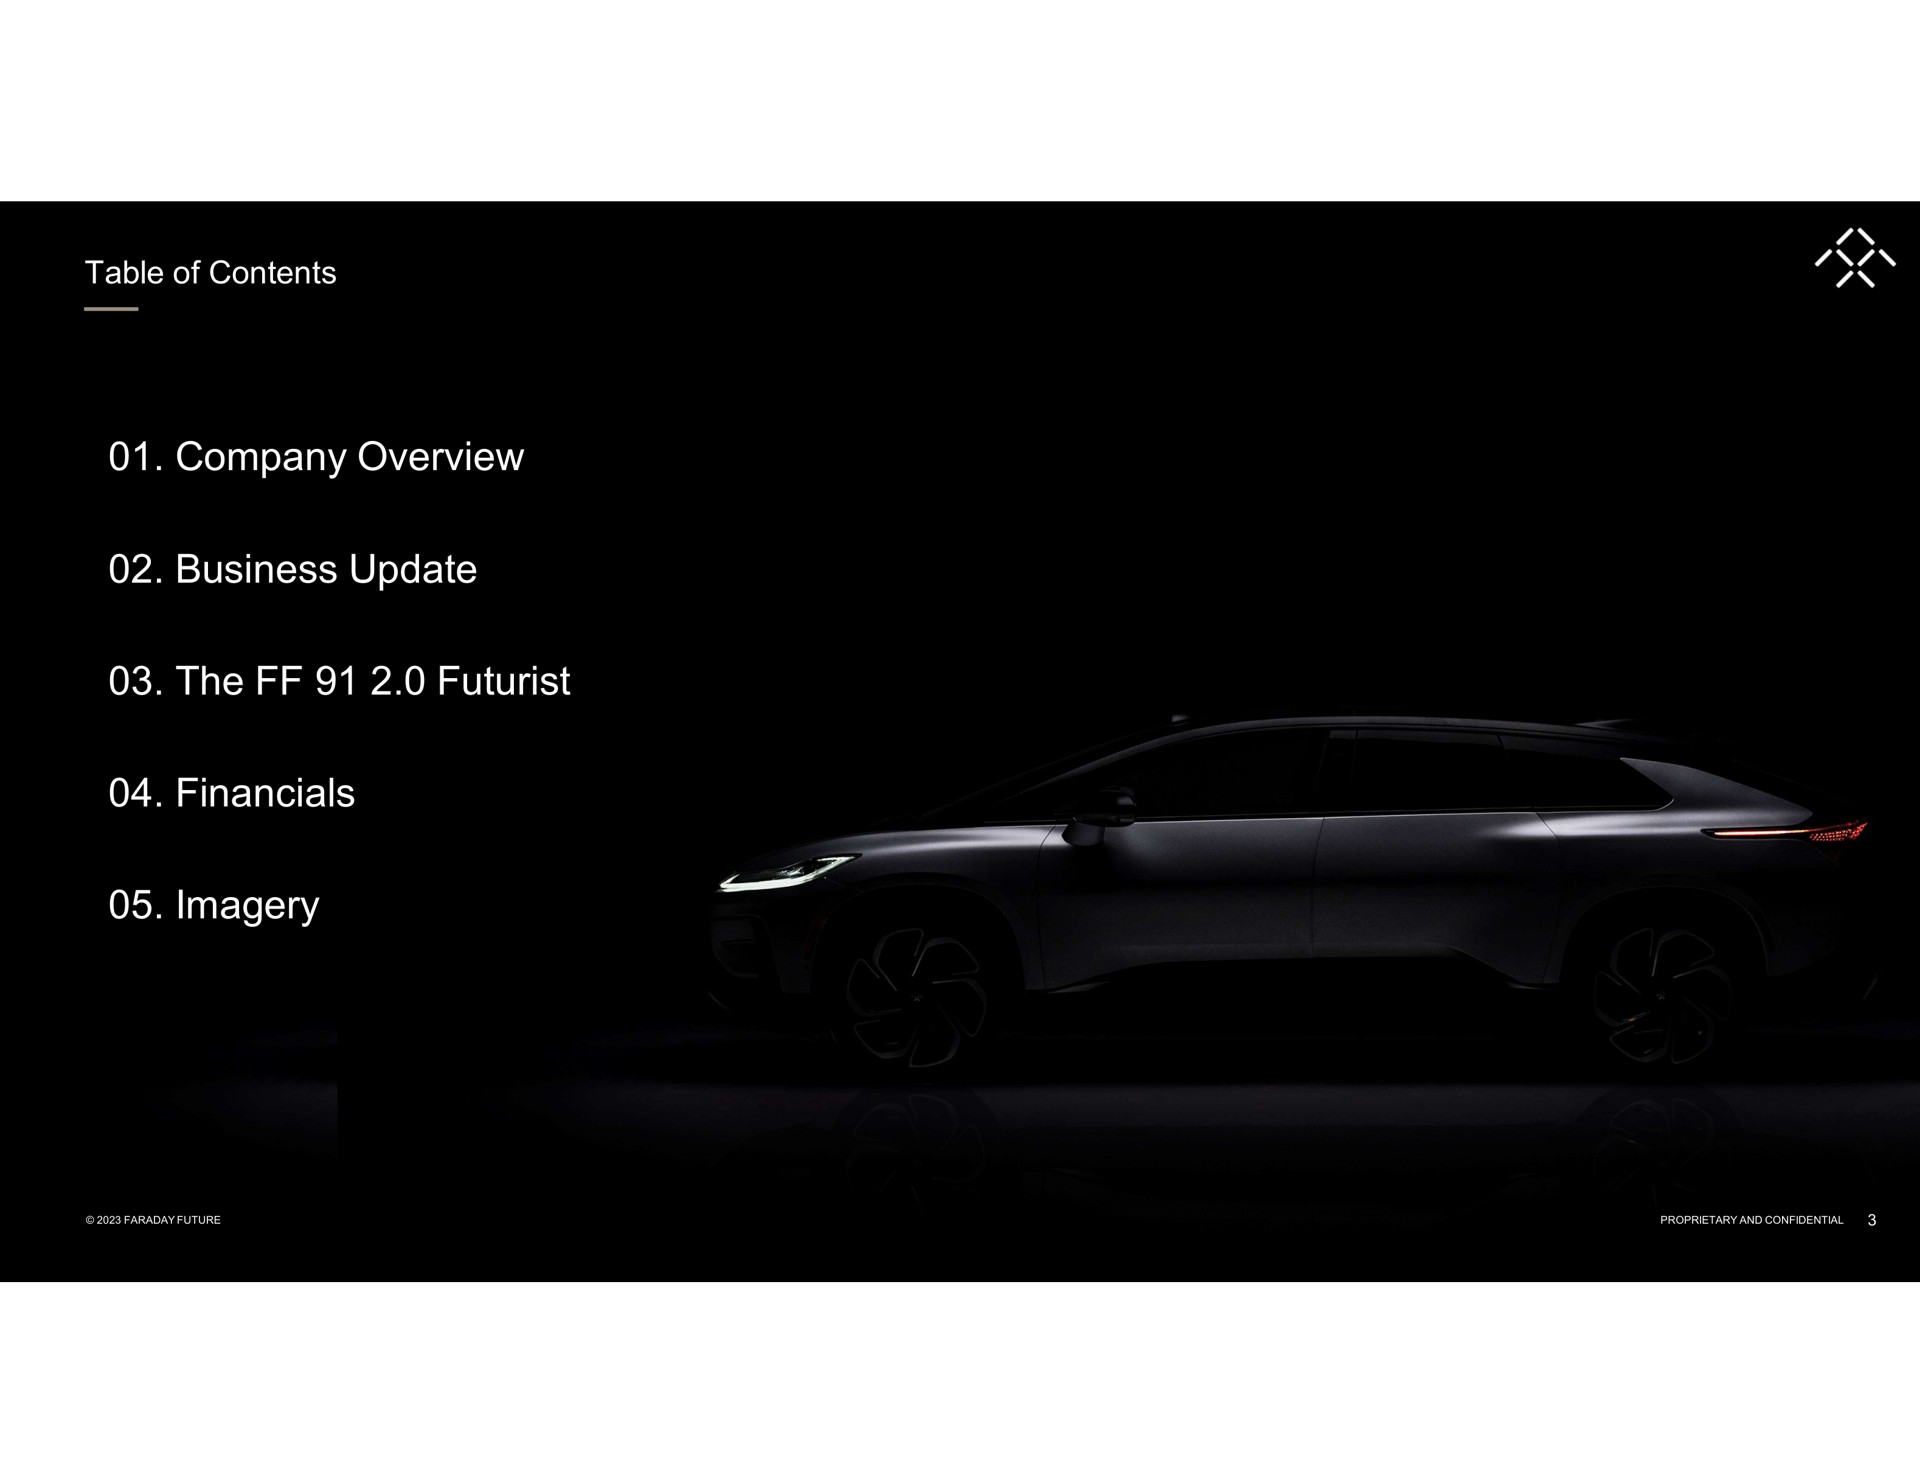 table of contents company overview company overview business update business update the futurist the futurist imagery imagery a | Faraday Future